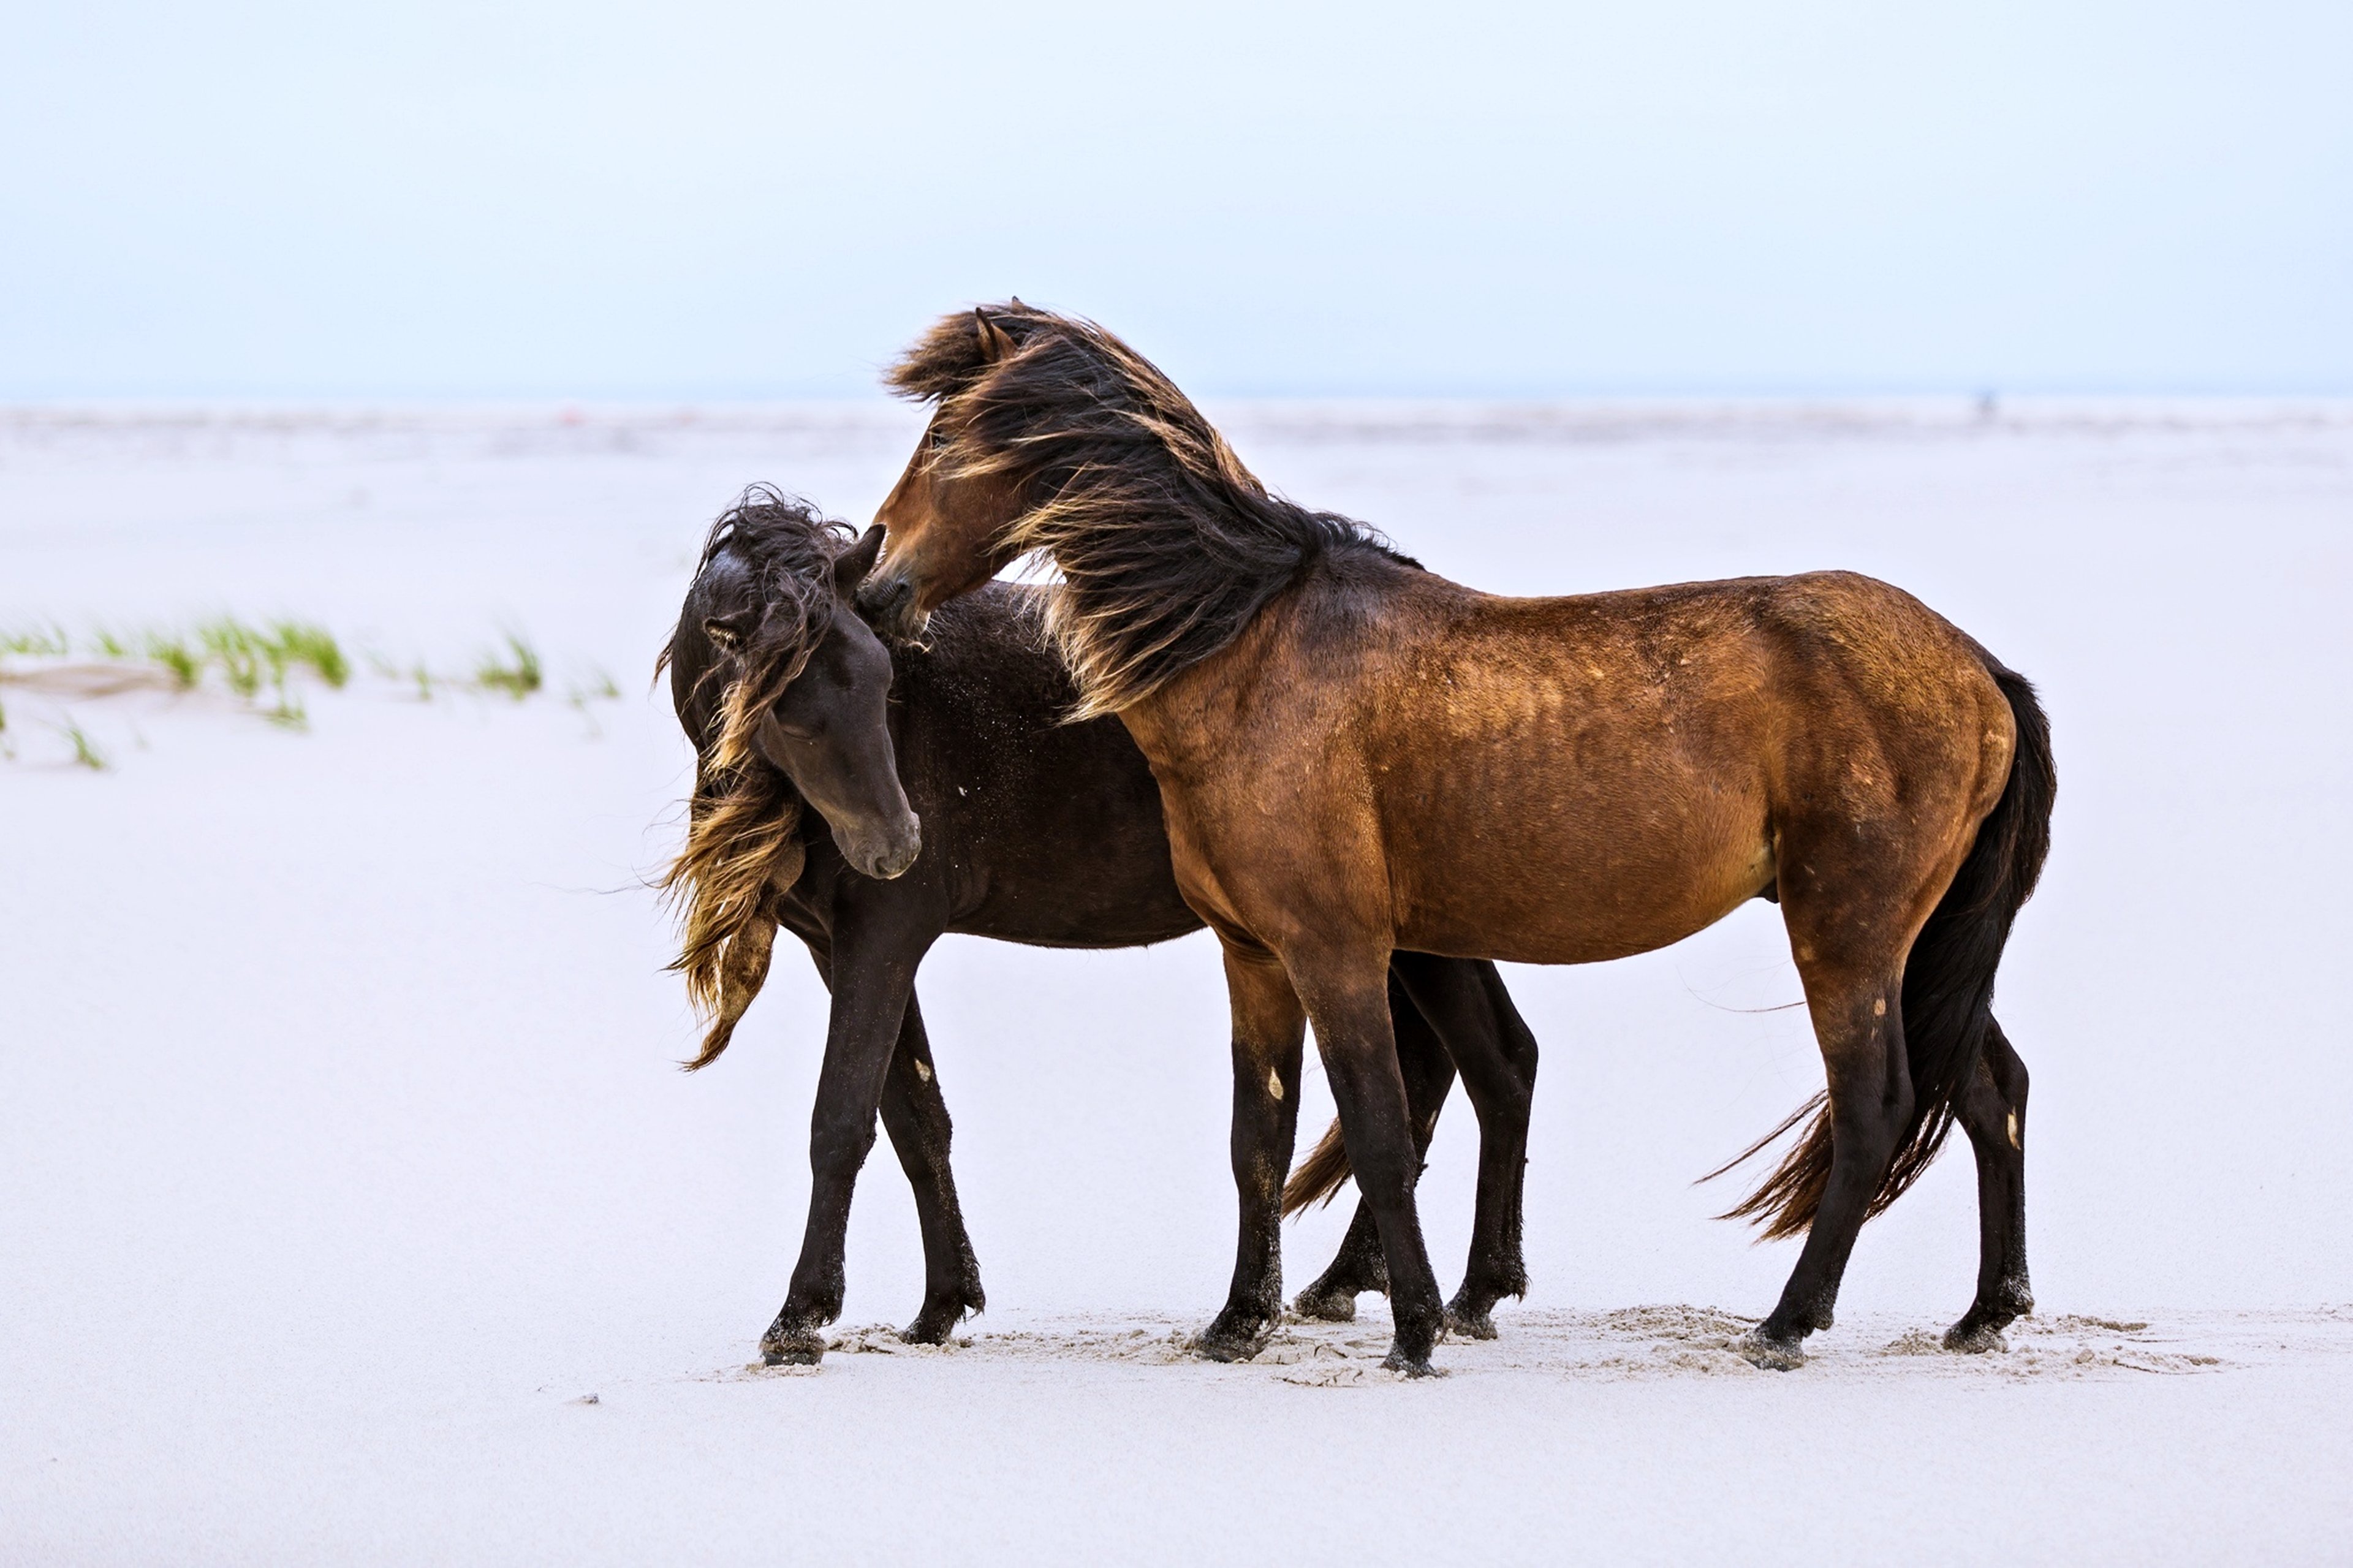 horses, Lovers, Friendship, Relationship, Beaches, Sand, Wind, Animals, Romance, Emotions, Landscapes, Nature Wallpaper